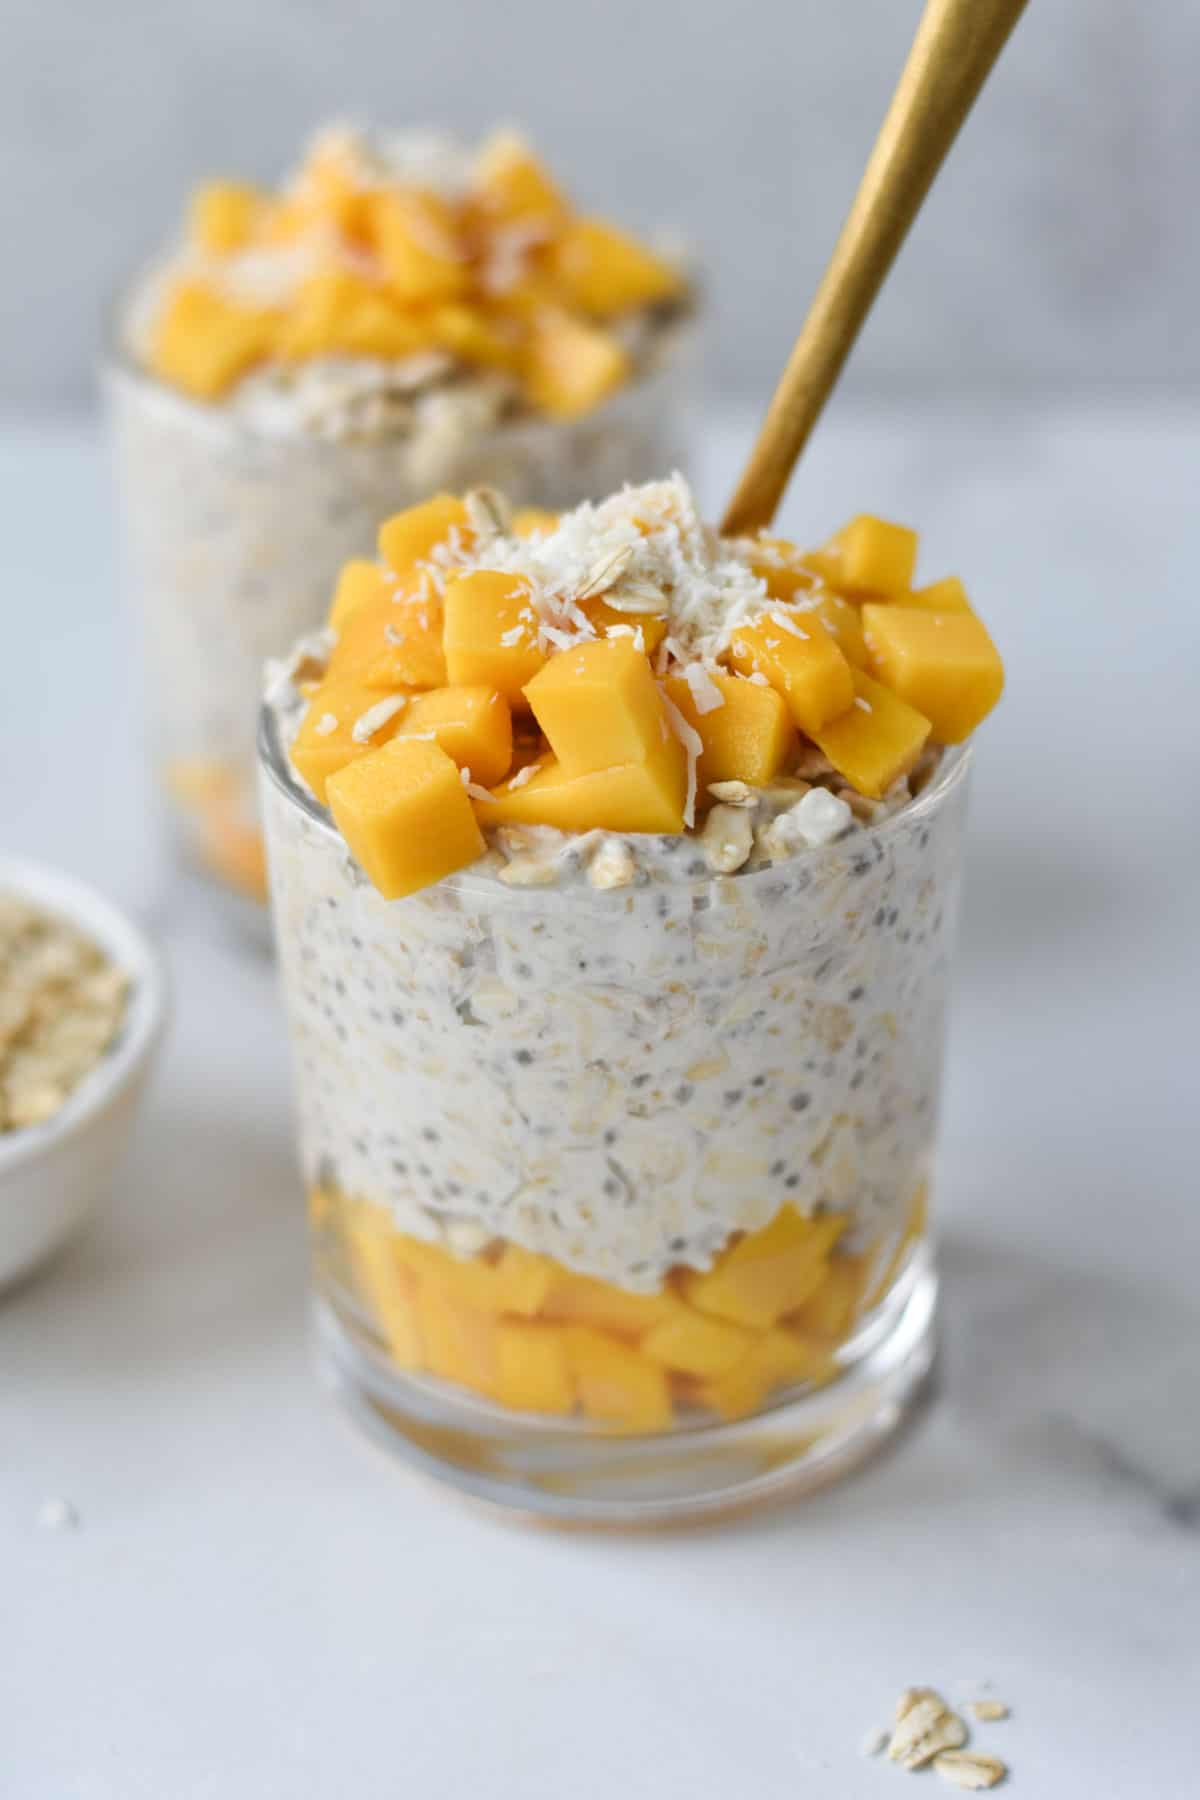 Layers of mango and overnight oats in a jar.